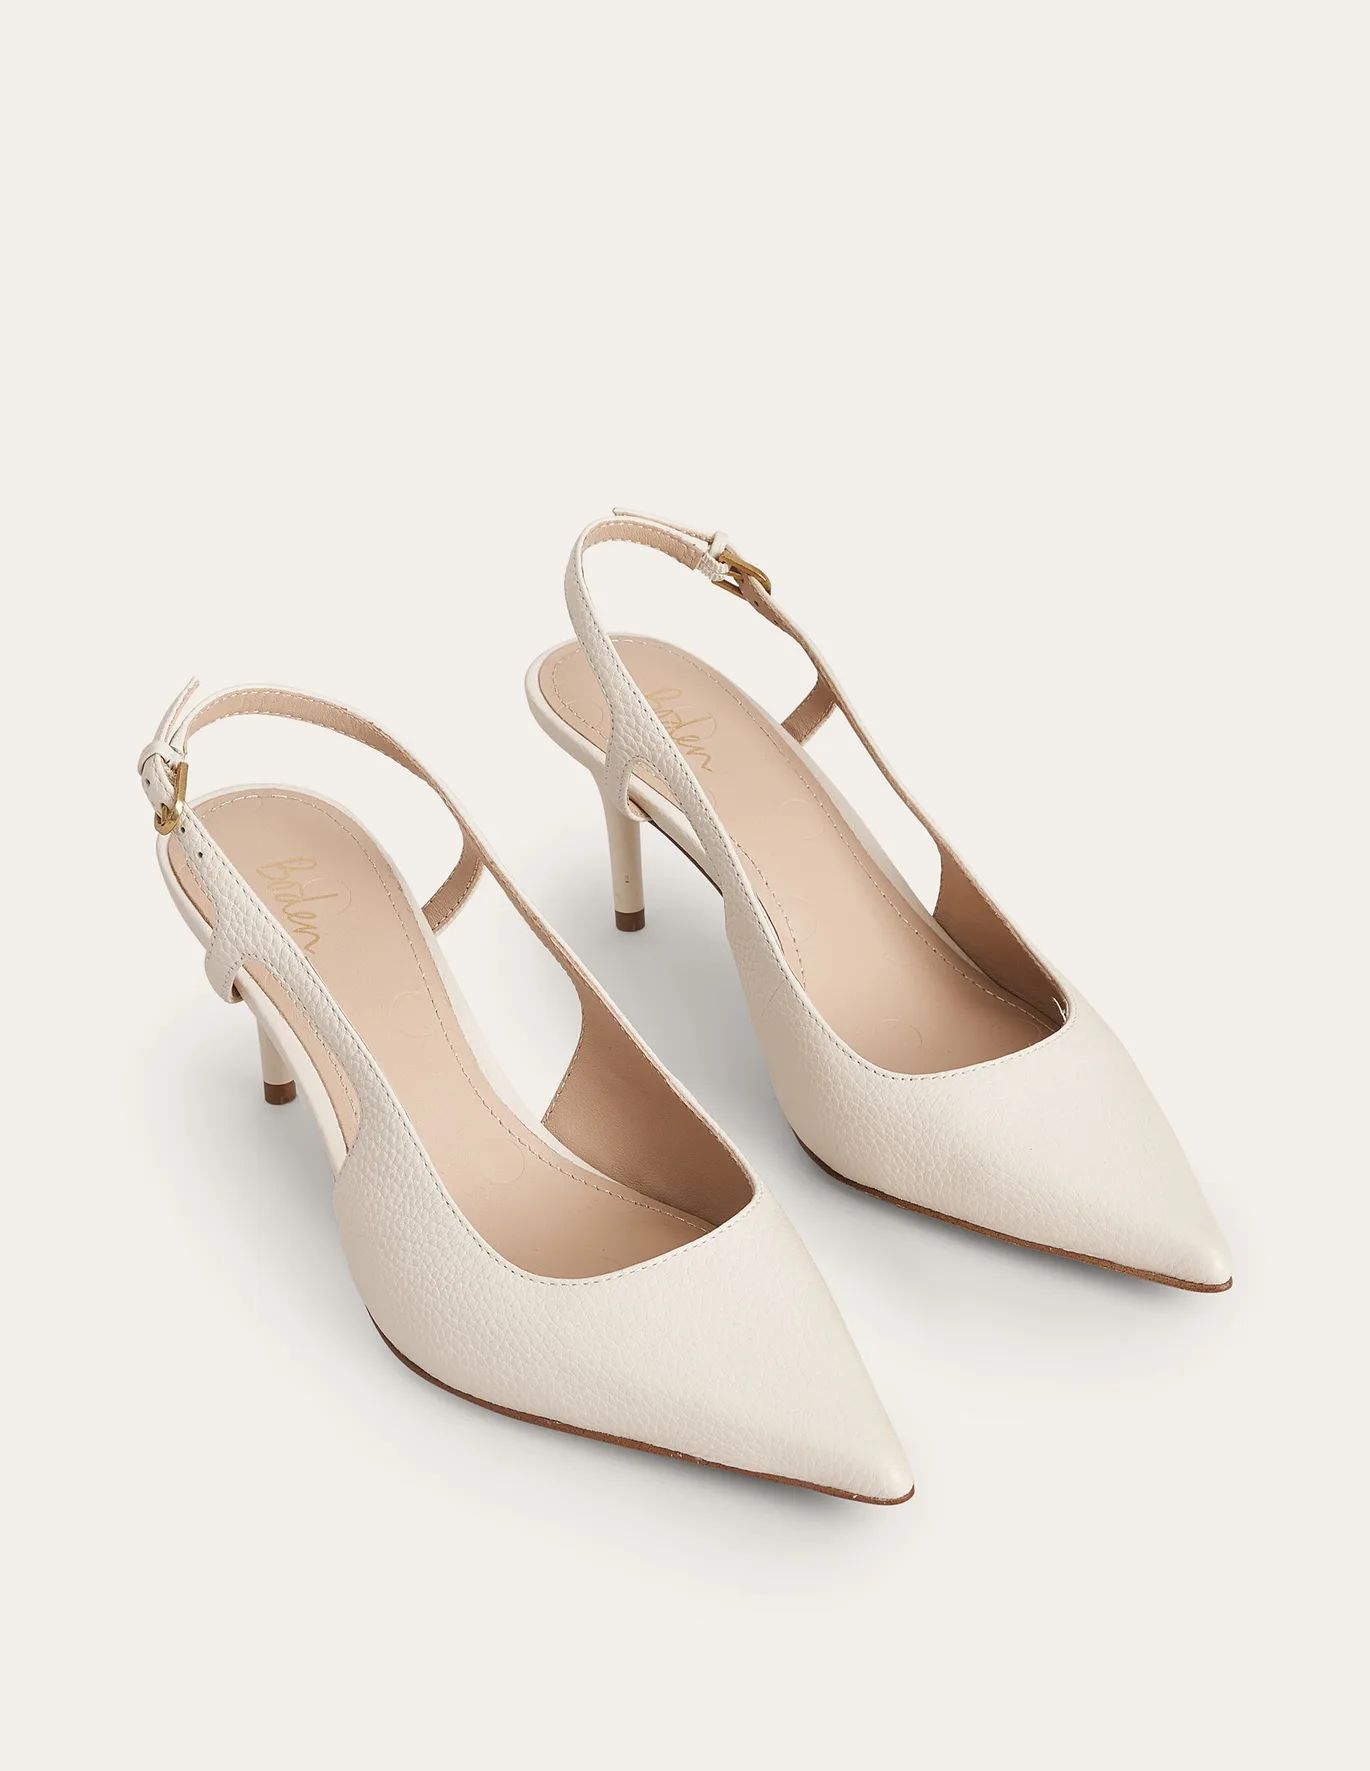 Cut-out Sling Back Heels - Off White Tumbled Leather | Boden (US)